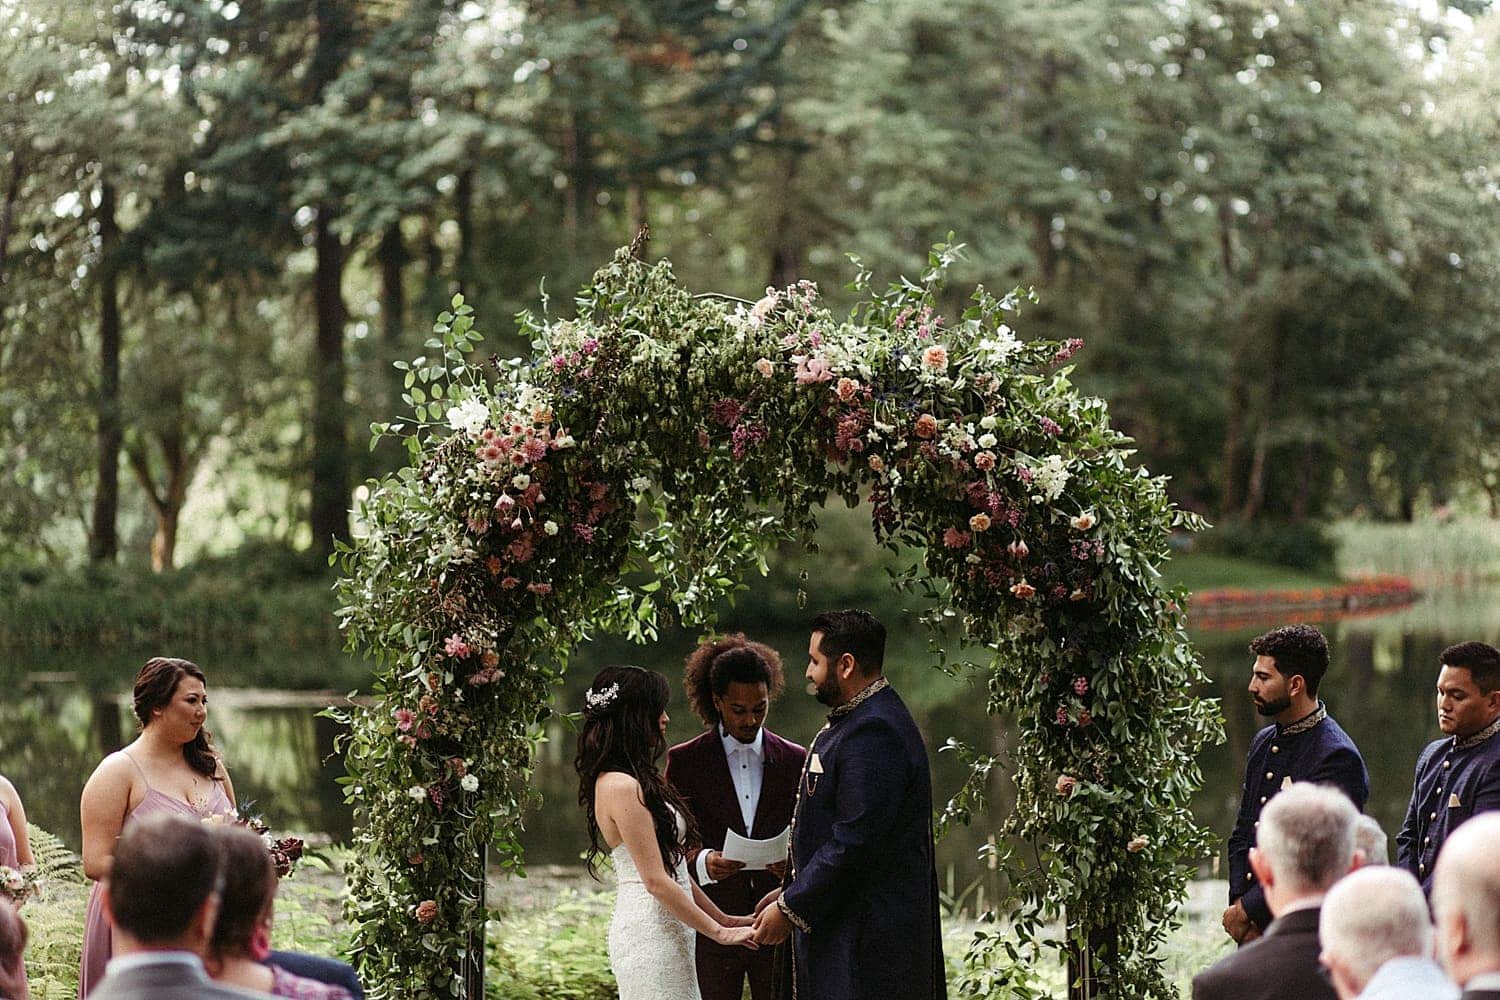 romantic and dreamy ceremony portrait at bridal veil lakes by marcela pulido photography portland wedding photographer